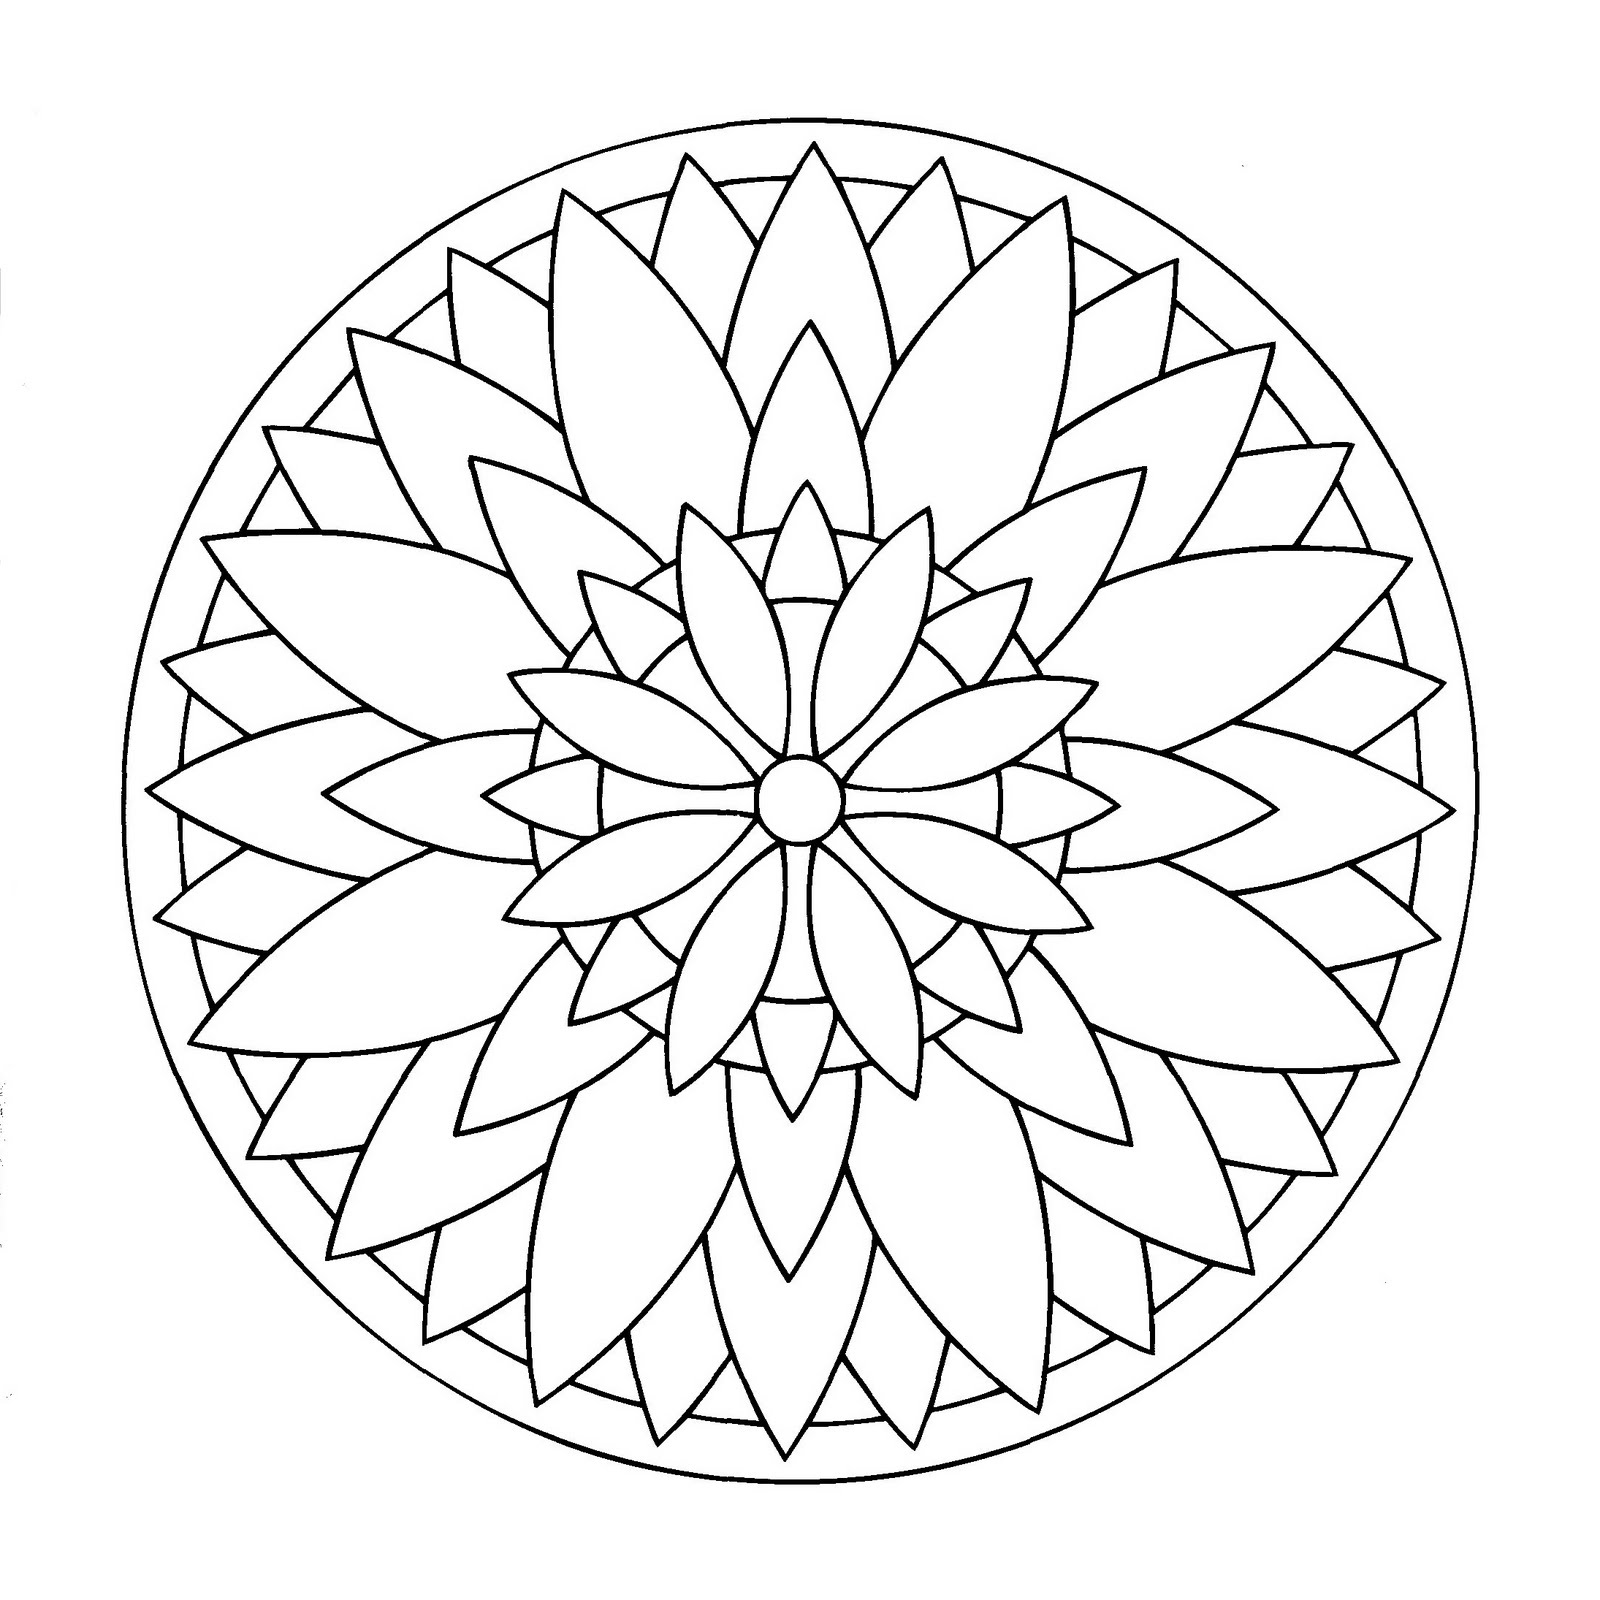 A mandala coloring page for the youngest, low level of difficulty. Coloring can help your children to learn the skill of patience. It allows your children to be relaxed and comfortable while creating a piece of art.